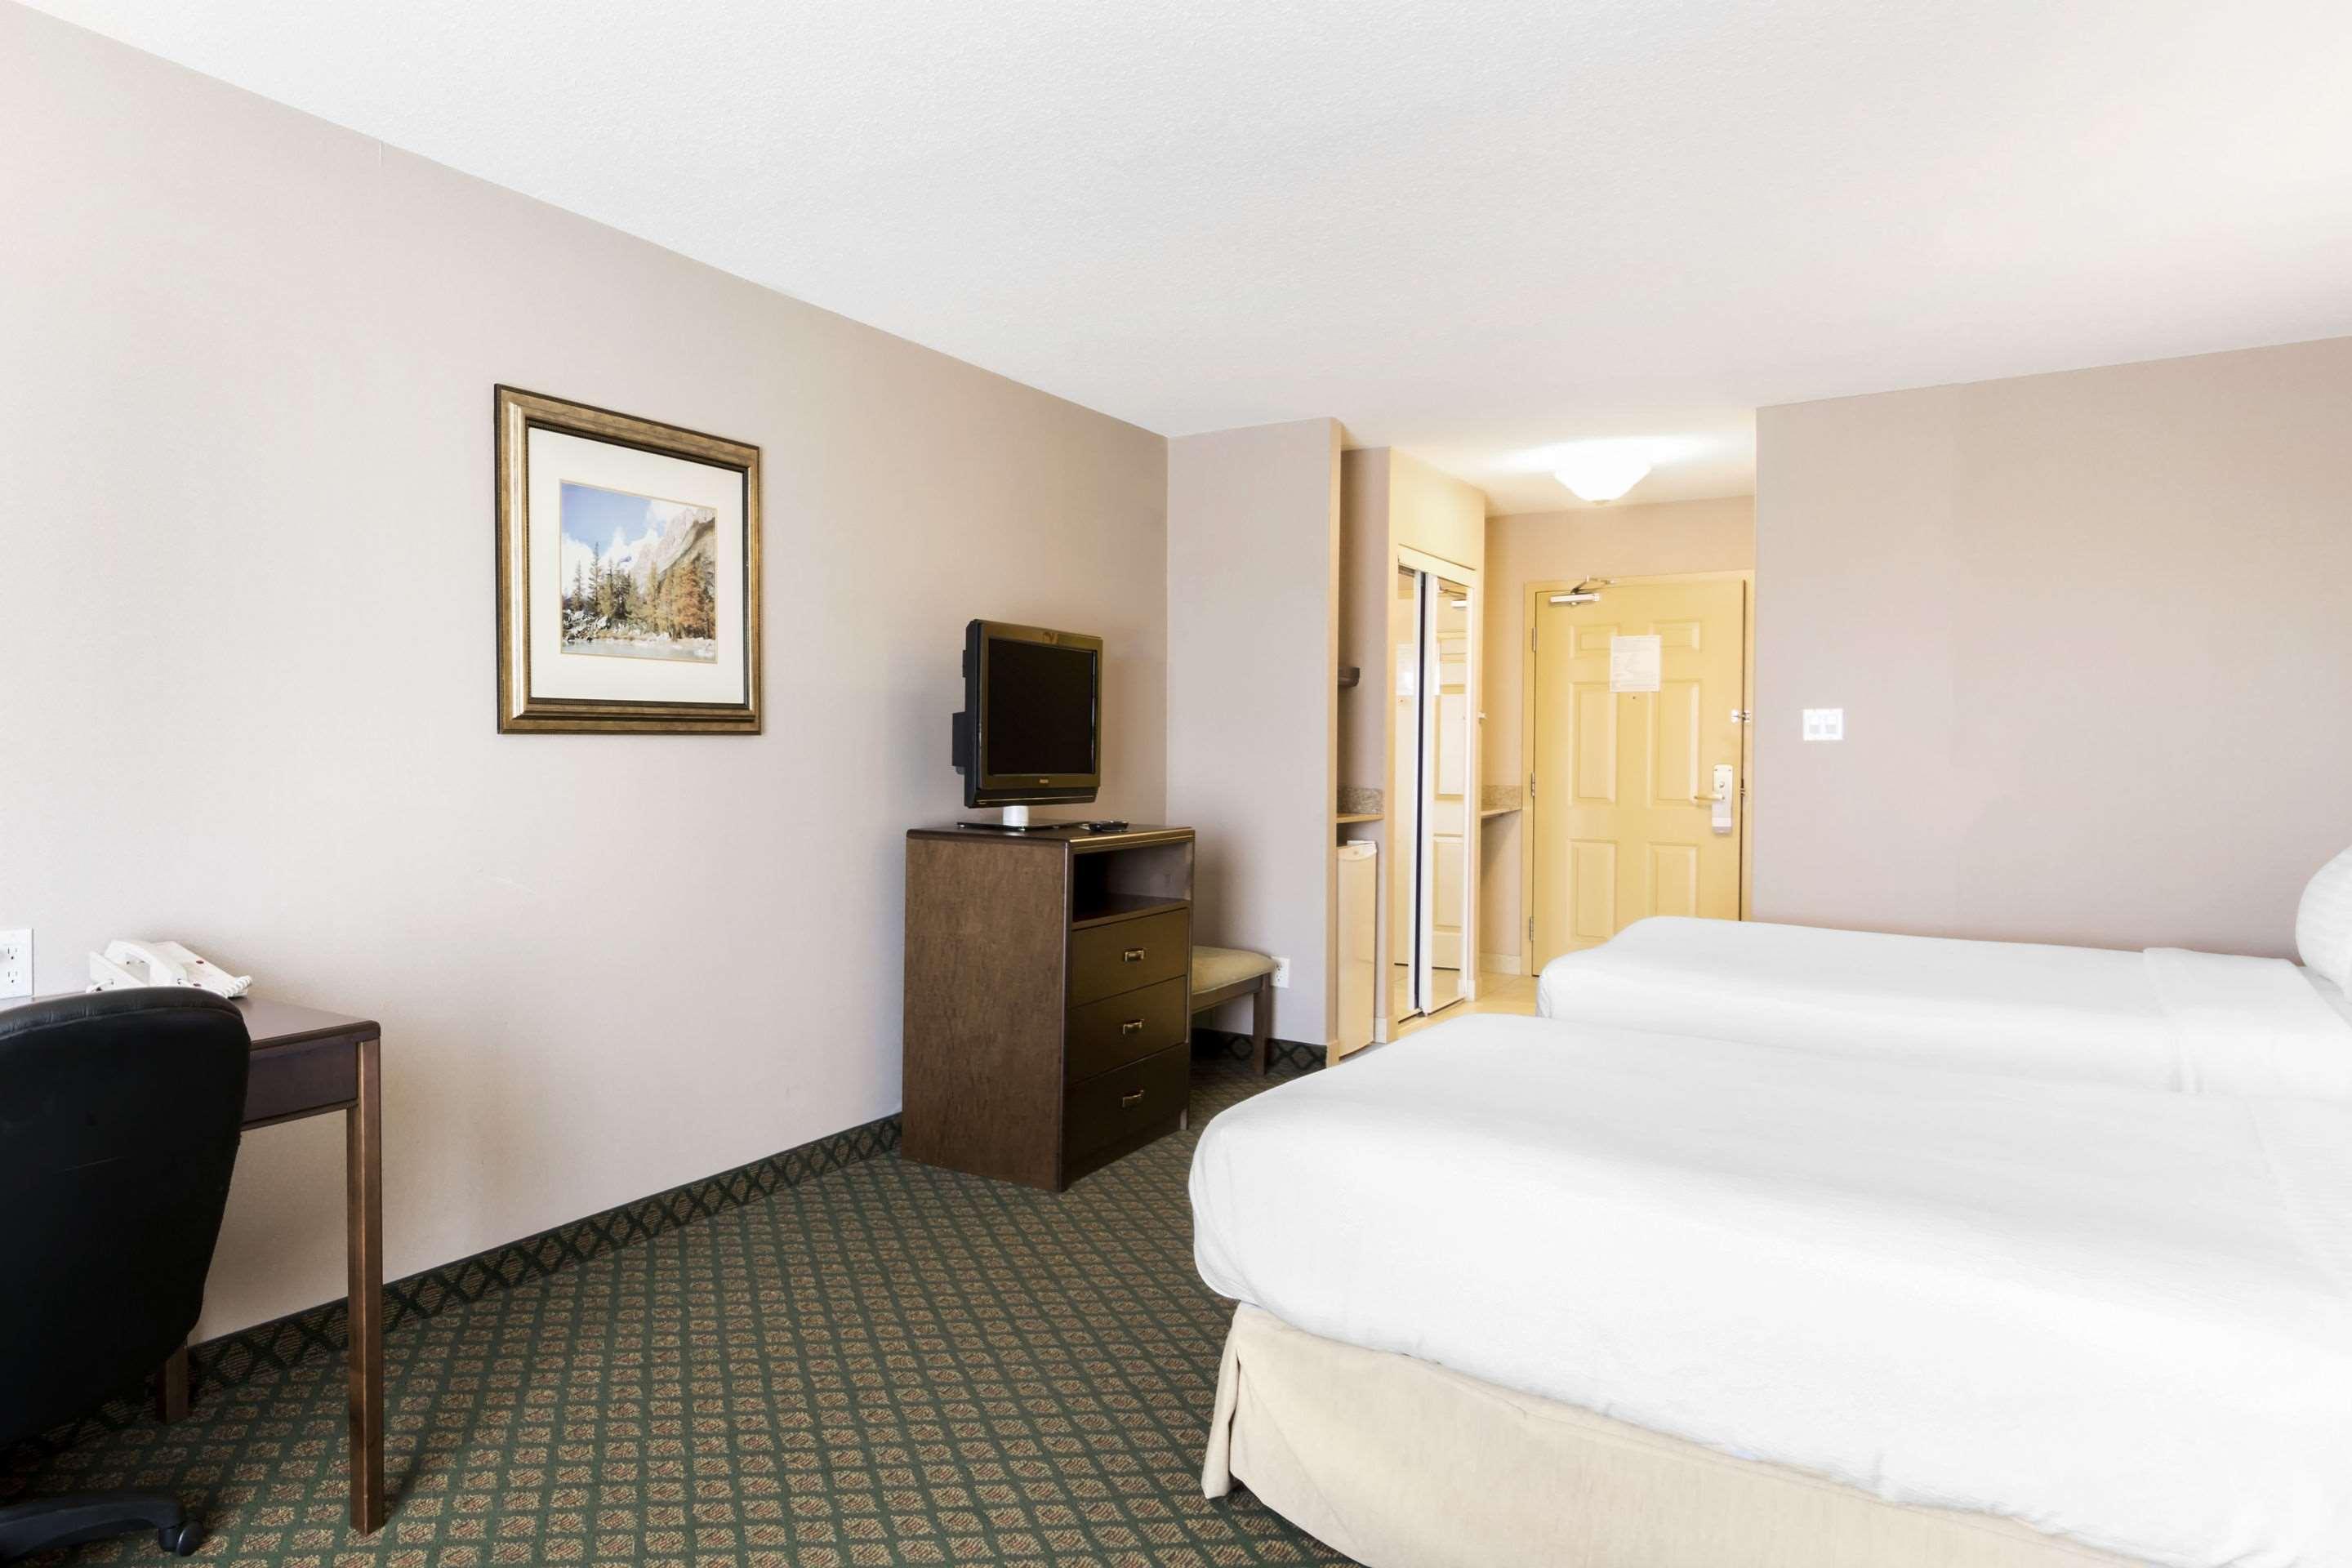 Clarion Hotel & Conference Center Sherwood Park Buitenkant foto